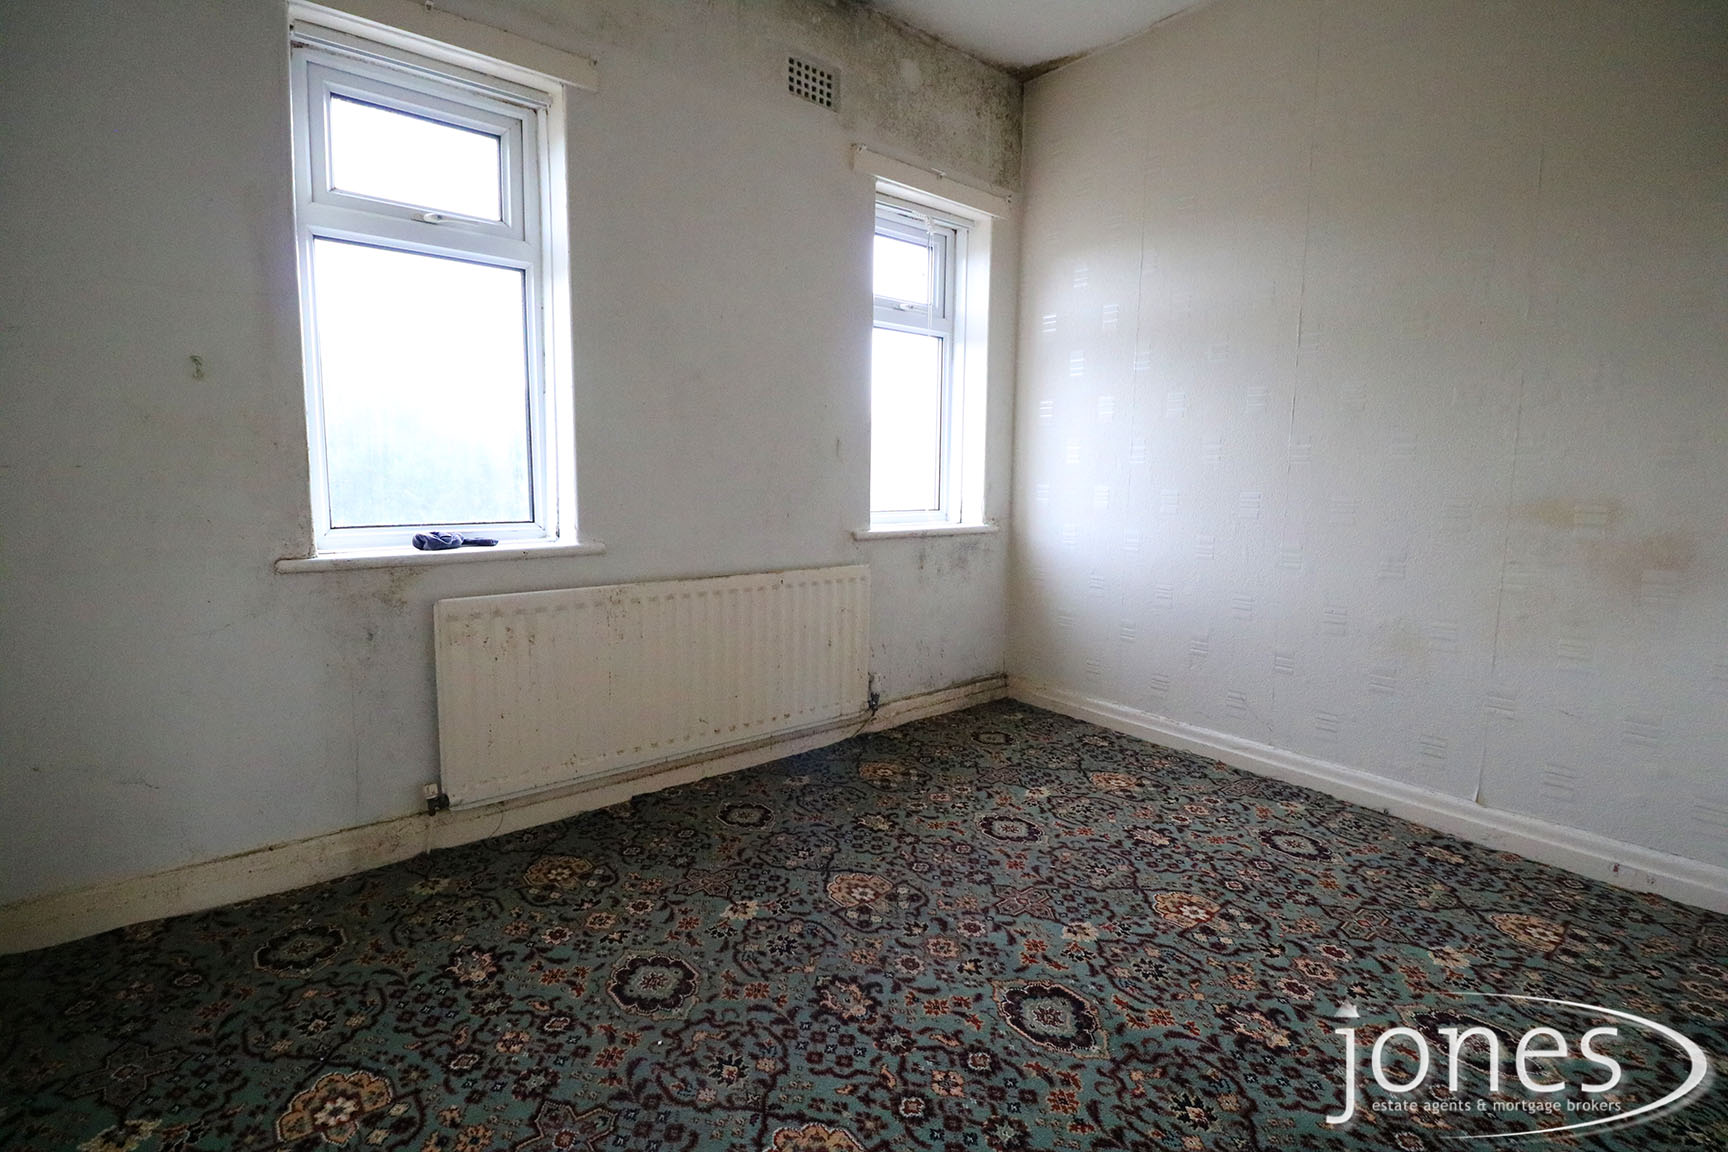 Home for Sale Let - Photo 09 Keithlands Avenue, Norton, Stockton on Tees, TS20